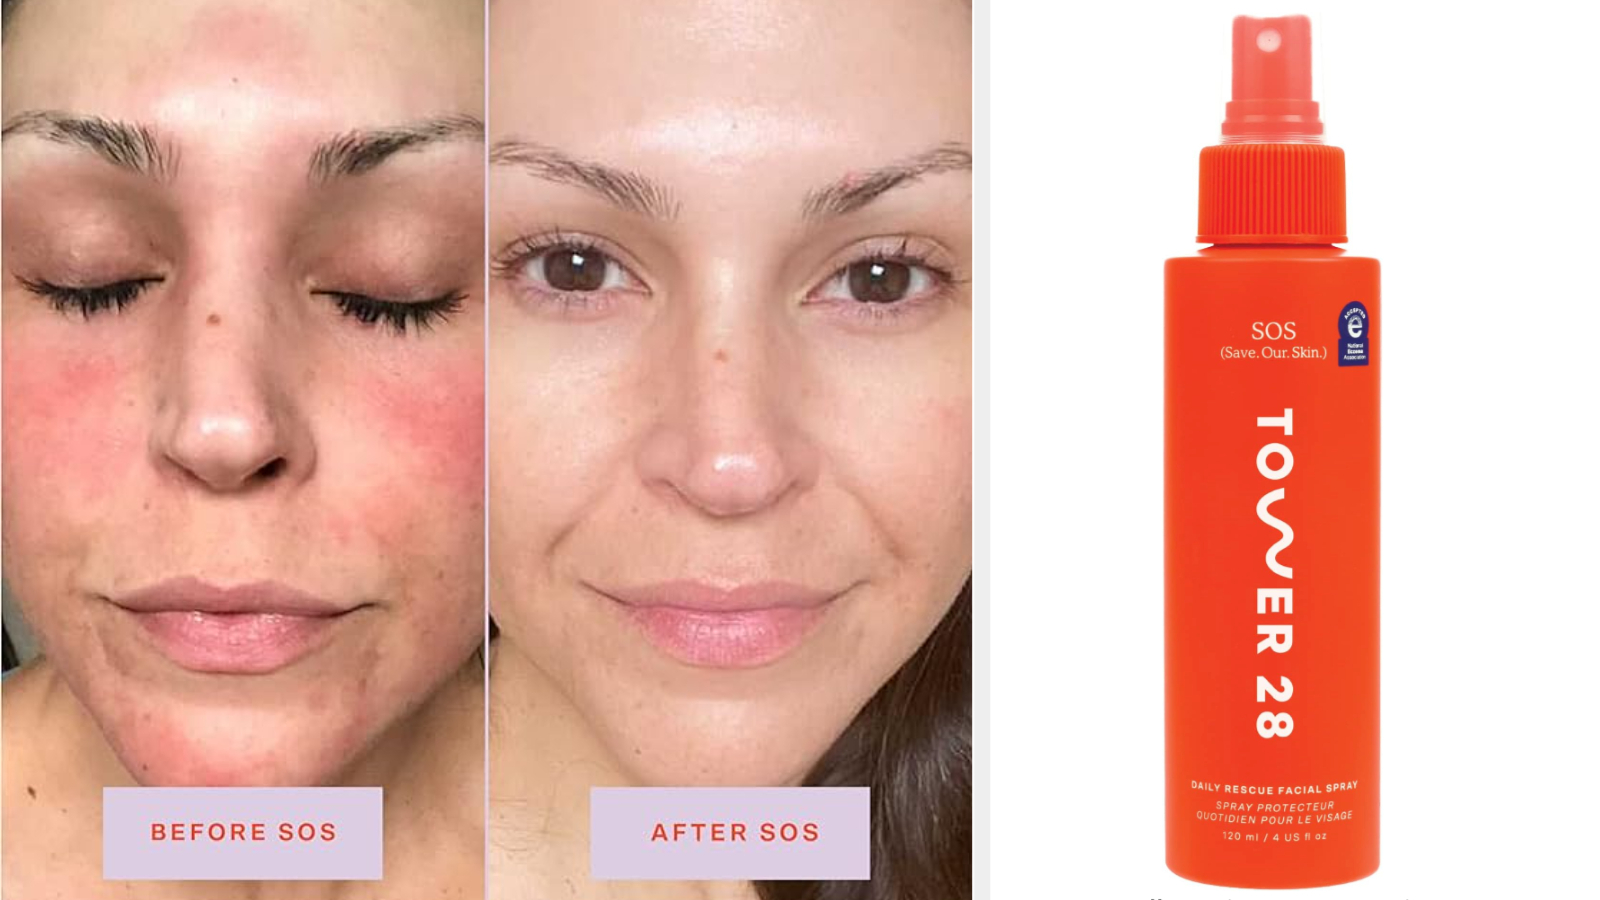 Before and after images of a person&#x27;s face following spray use, and a bottle of Tower 28 SOS facial spray